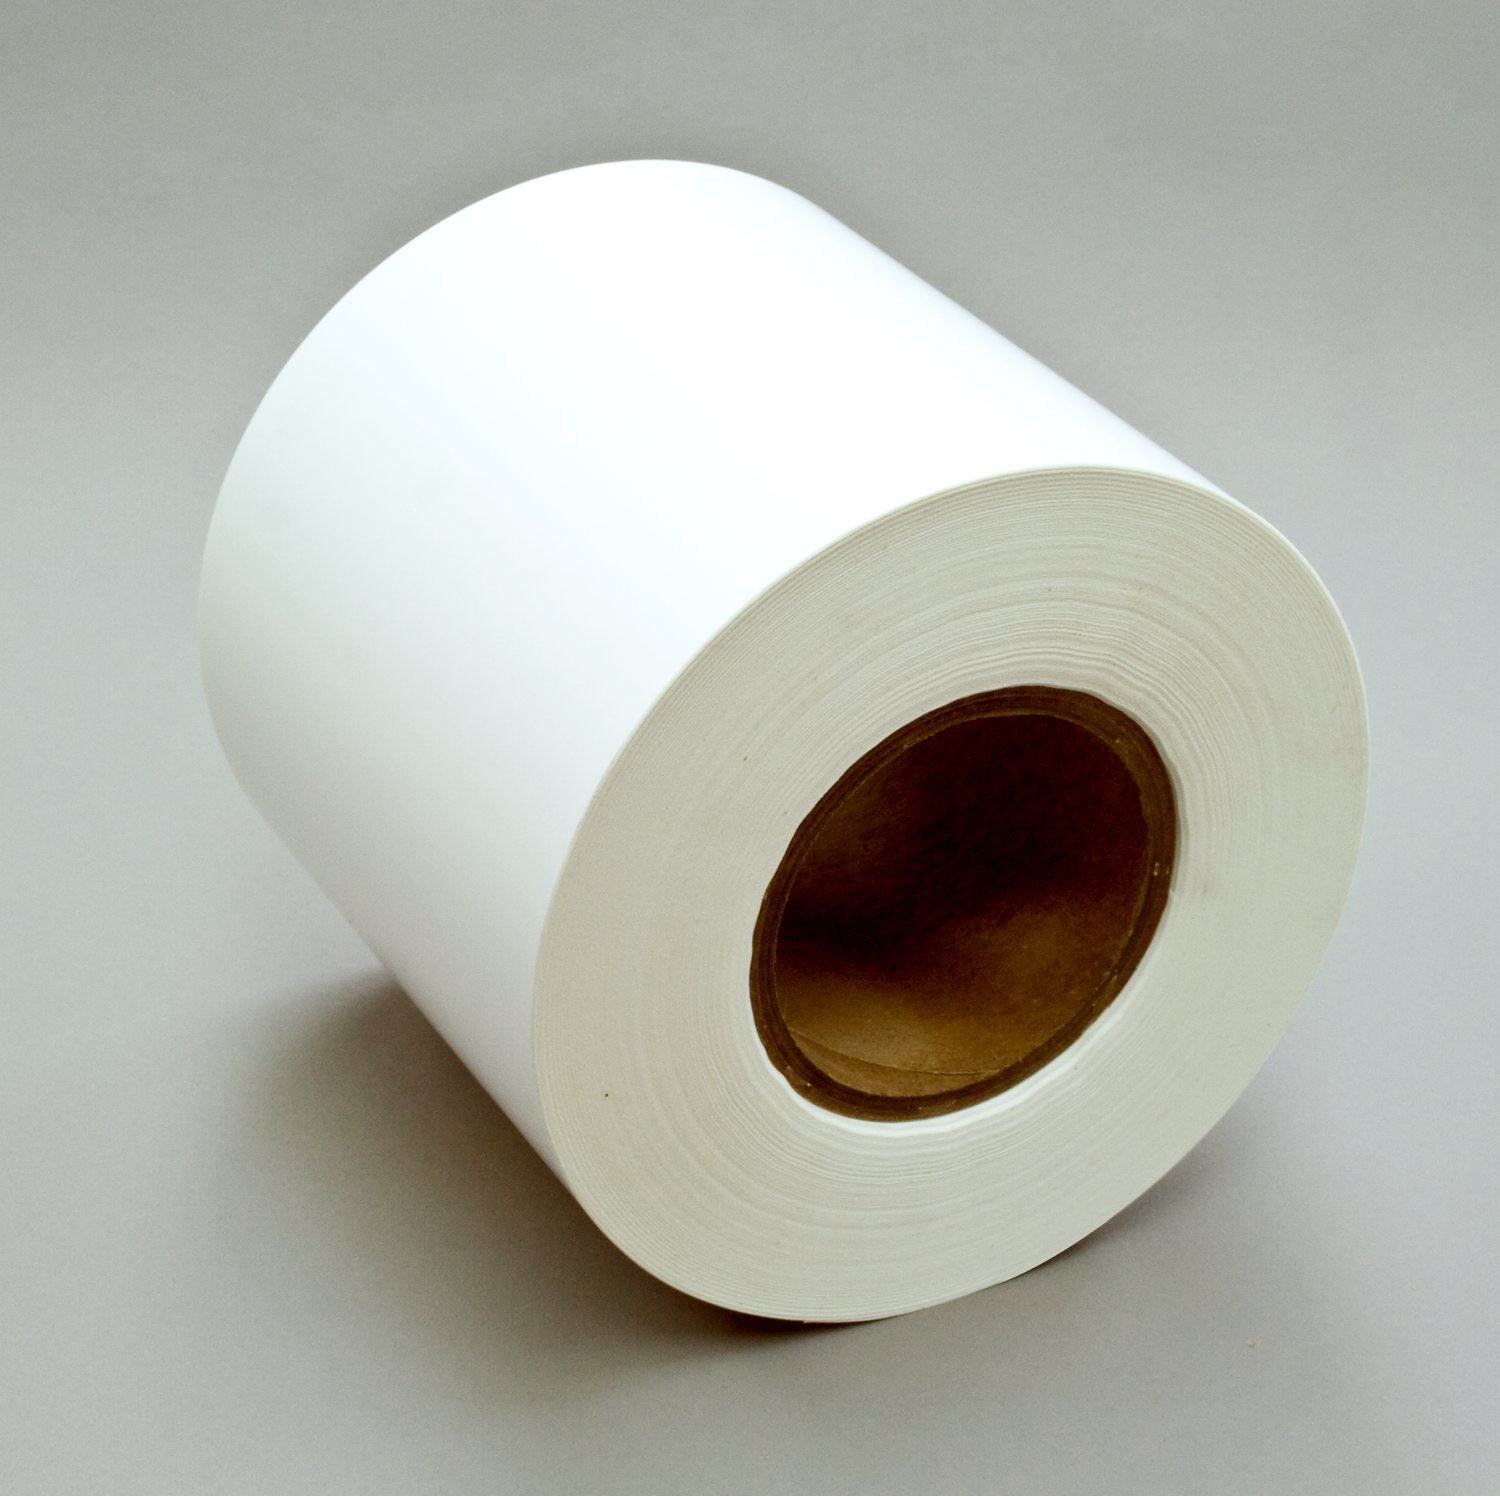 7100013669 - 3M Sheet and Screen Label Material 7907, Matte White Polyester, Roll,
Config